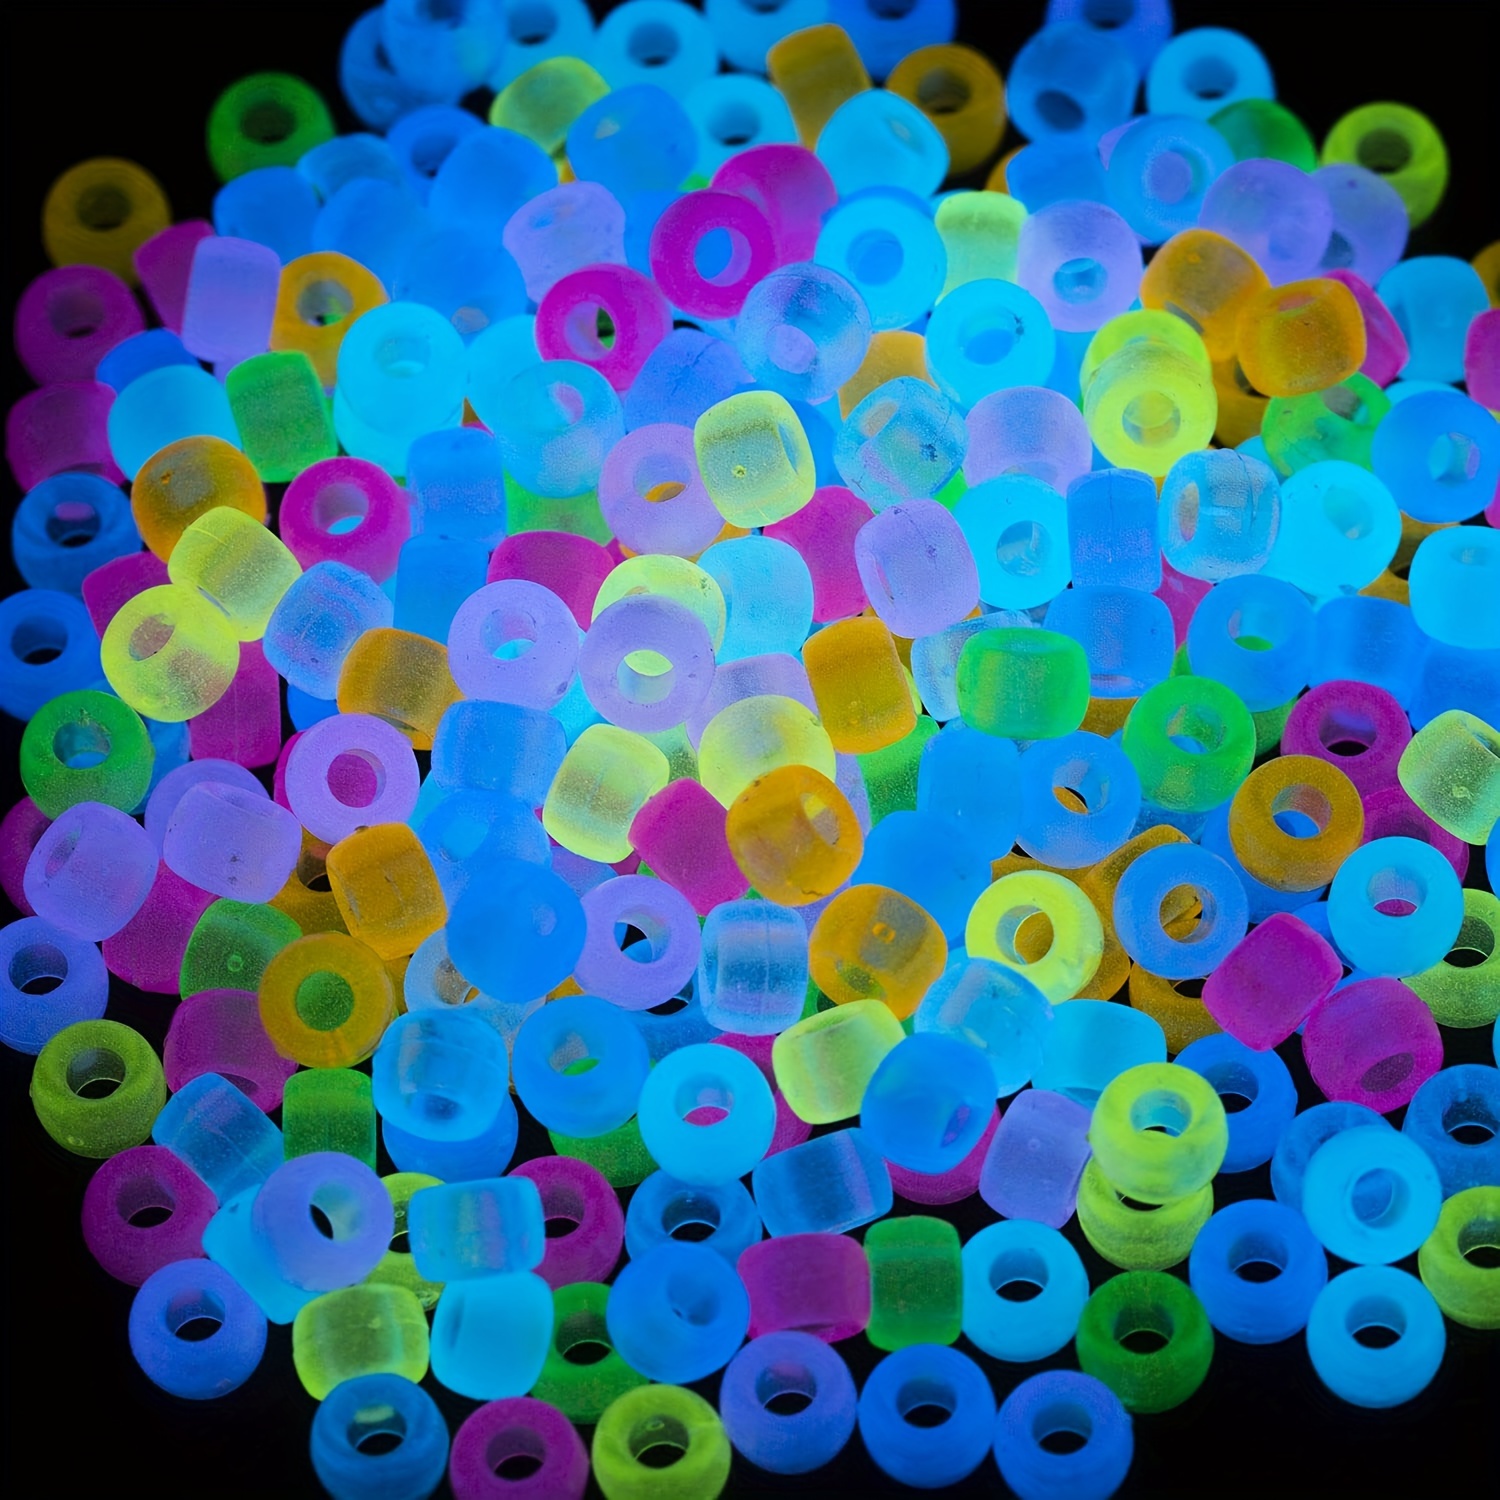 

1000 Pcs Acrylic Beads, Luminous Barrel Mini Plastic Beads, For Making Necklace Friendship Bangle, Make Braid Hair Beads, 6x9mm/0.23×0.35in (mixed Color)